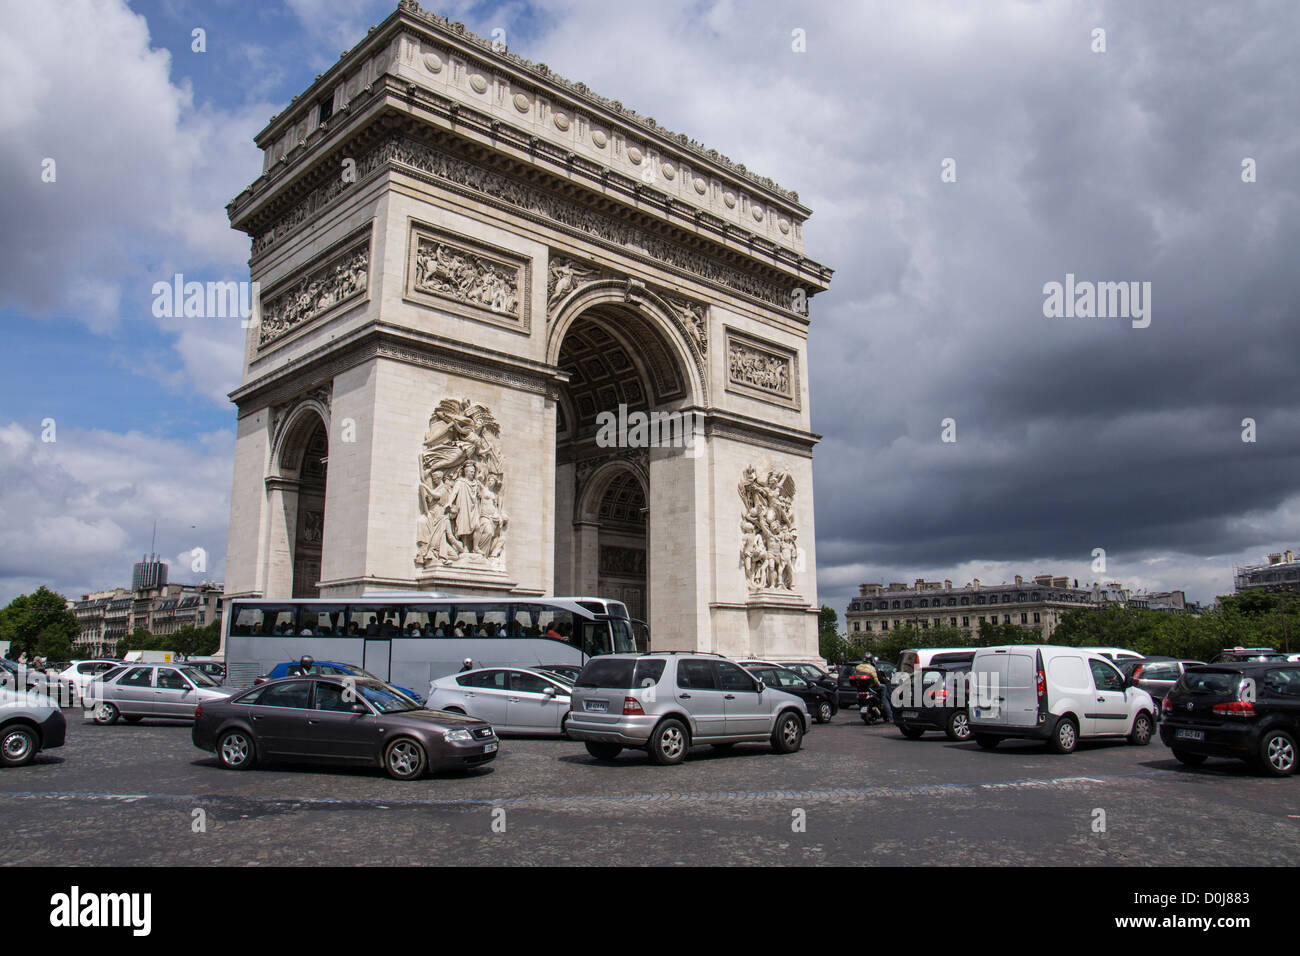 Arc de Triomphe in monument Paris France with traffic Stock Photo